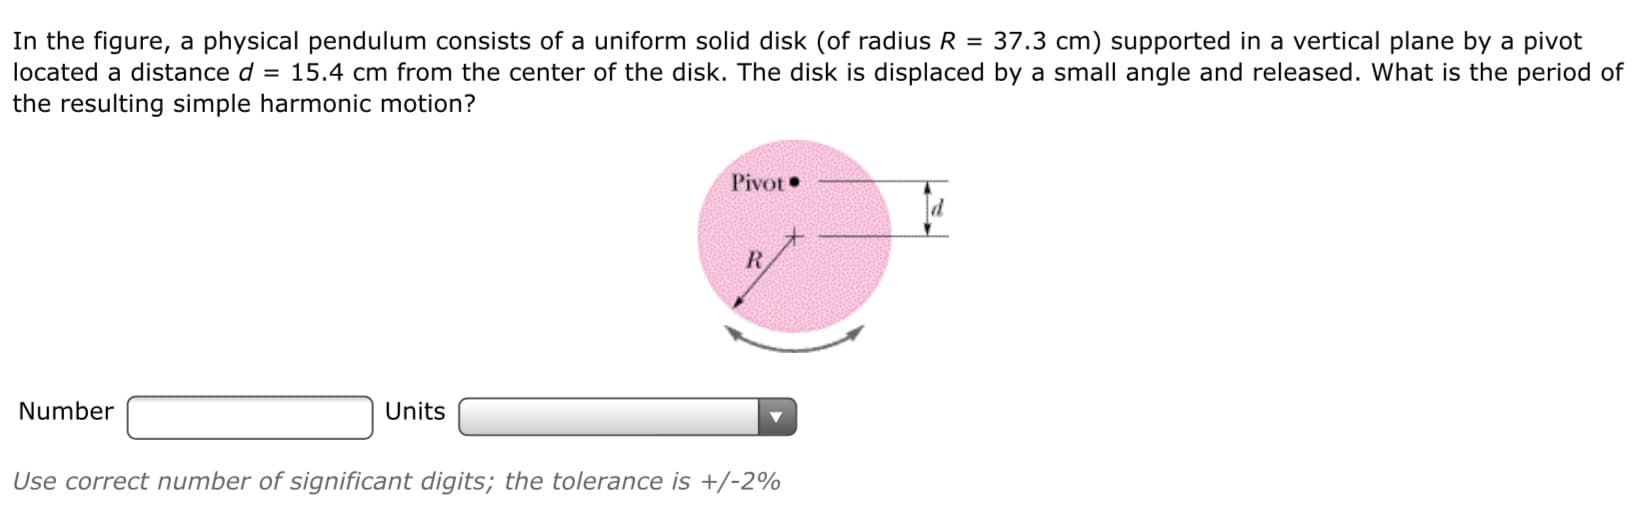 In the figure, a physical pendulum consists of a uniform solid disk (of radius R = 37.3 cm) supported in a vertical plane by a pivot
located a distance d = 15.4 cm from the center of the disk. The disk is displaced by a small angle and released. What is the period of
the resulting simple harmonic motion?
Pivot•
R.
Number
Units
Use correct number of significant digits; the tolerance is +/-2%
